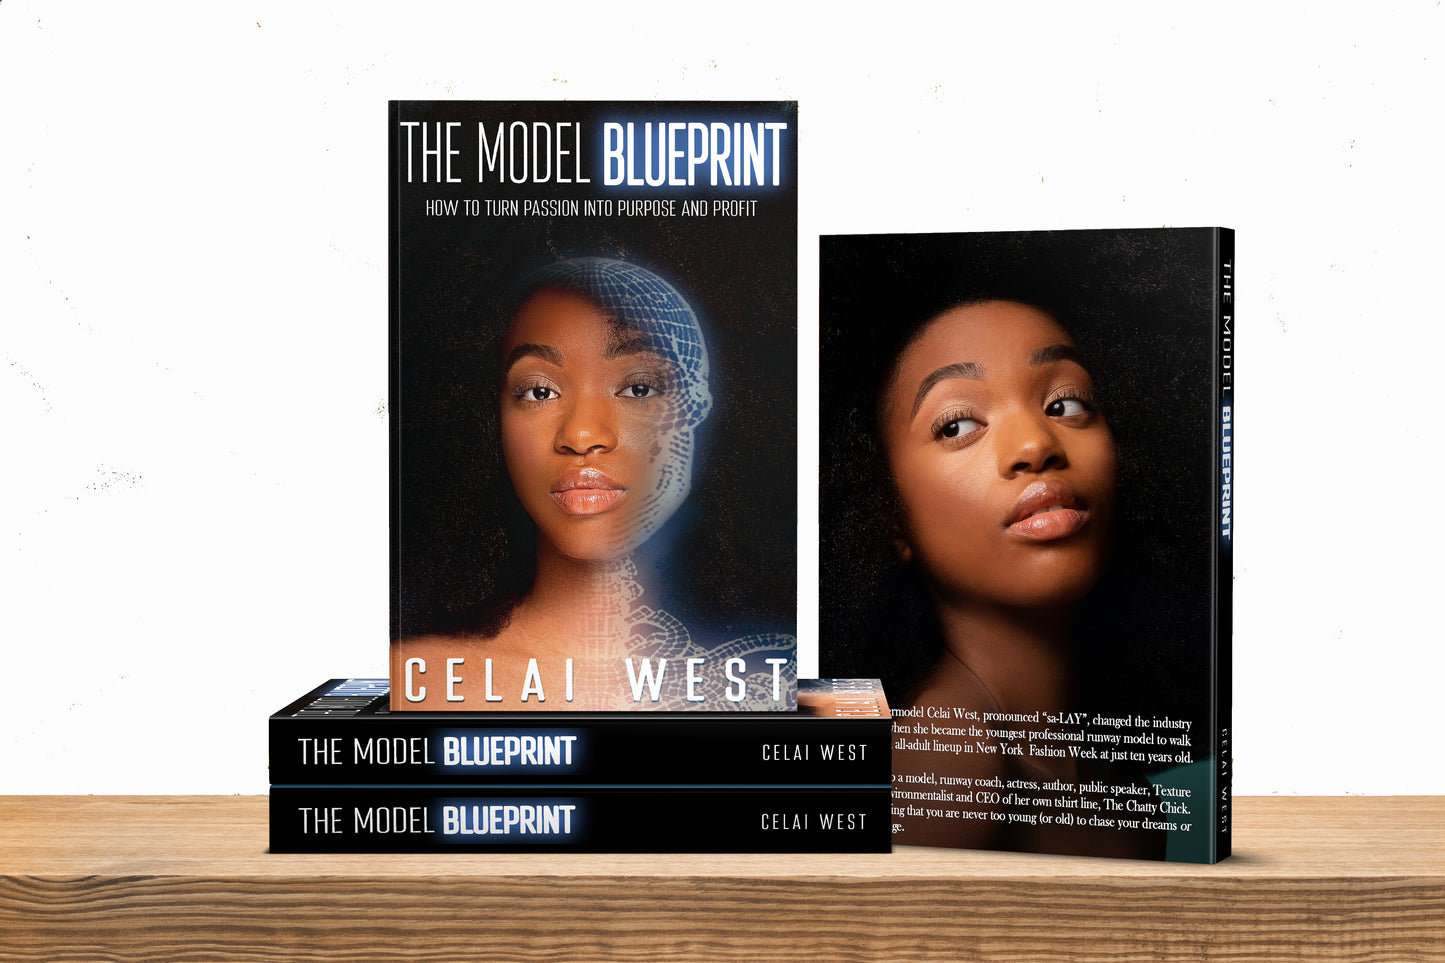 The Model Blueprint: How To Turn Passion Into Purpose And Profit